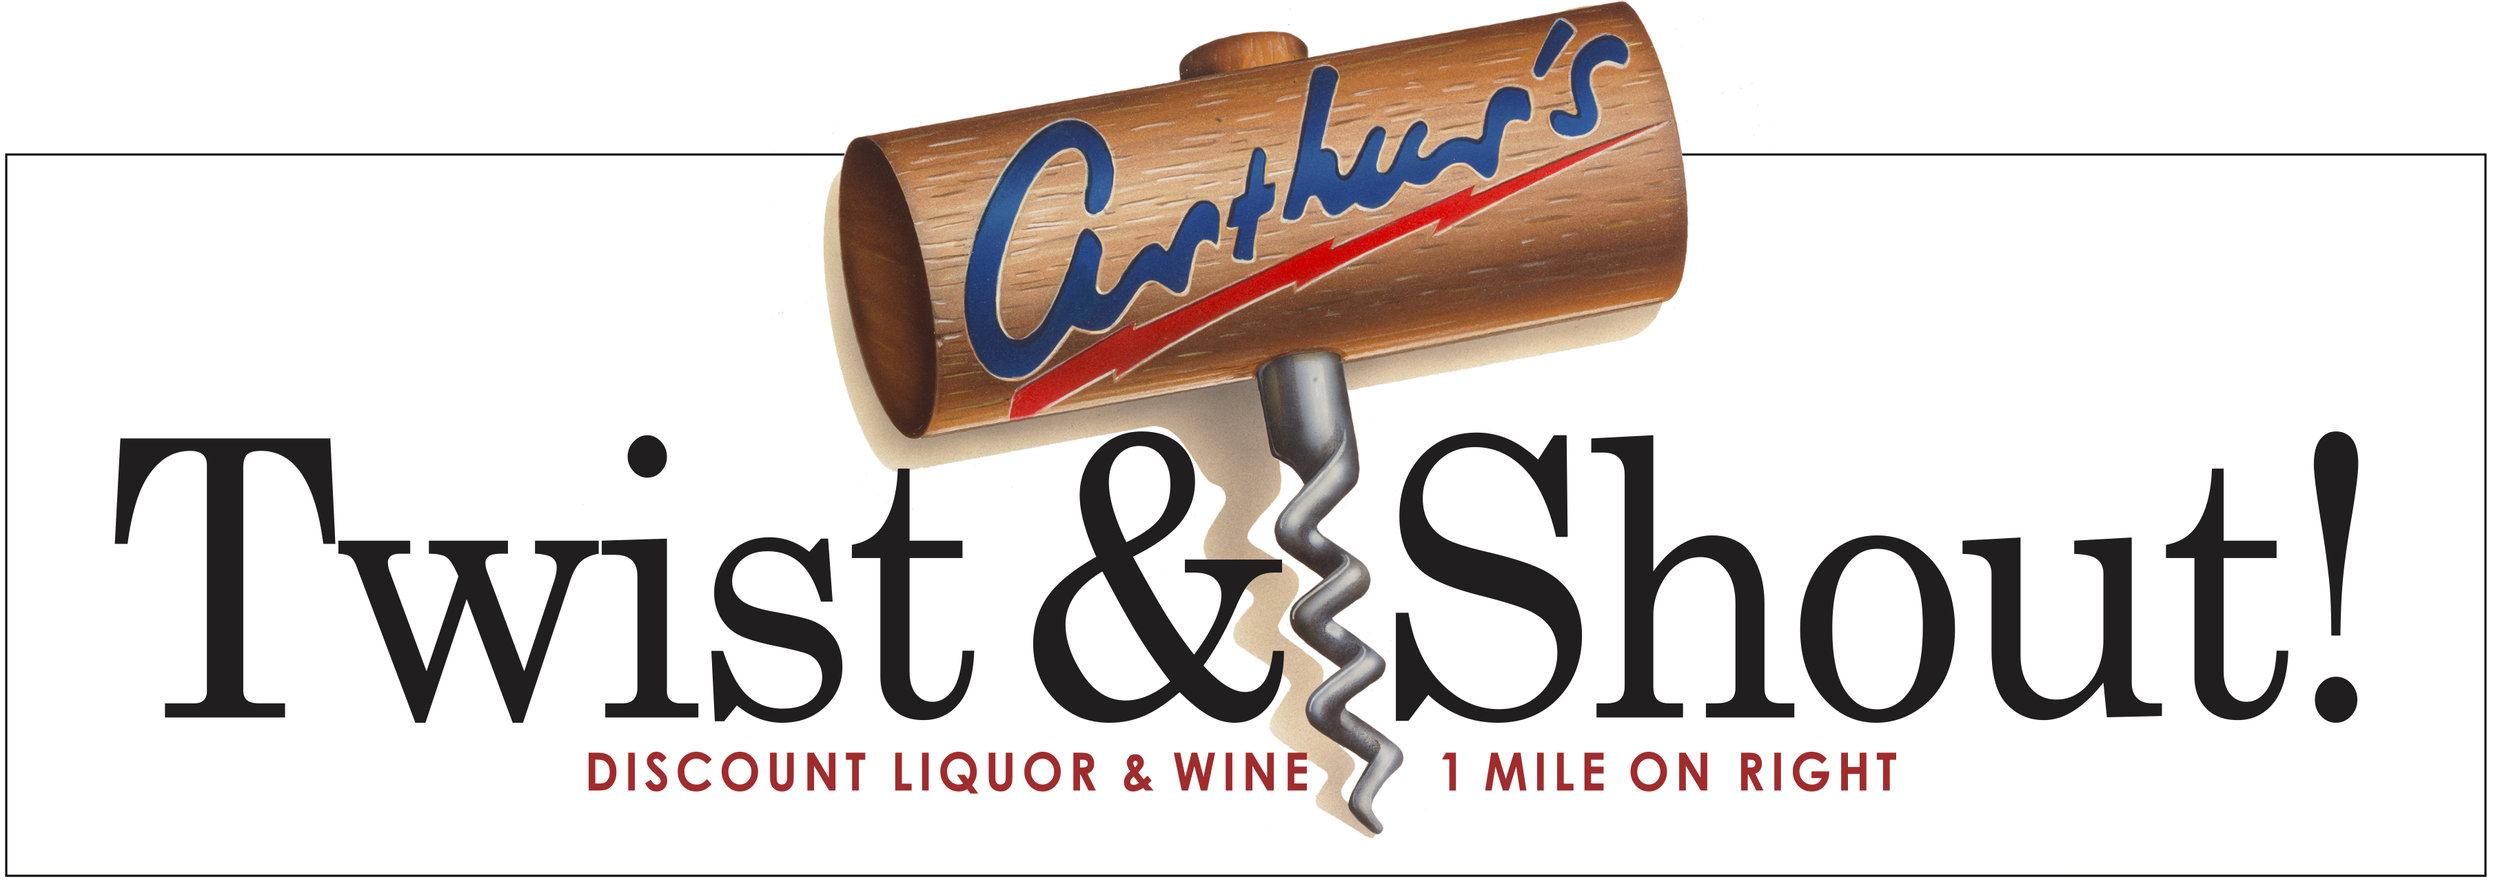  Arthur’s outdoor “Twist &amp; Shout!”  Branding creative, design and copywriting by Chuck Mitchell 